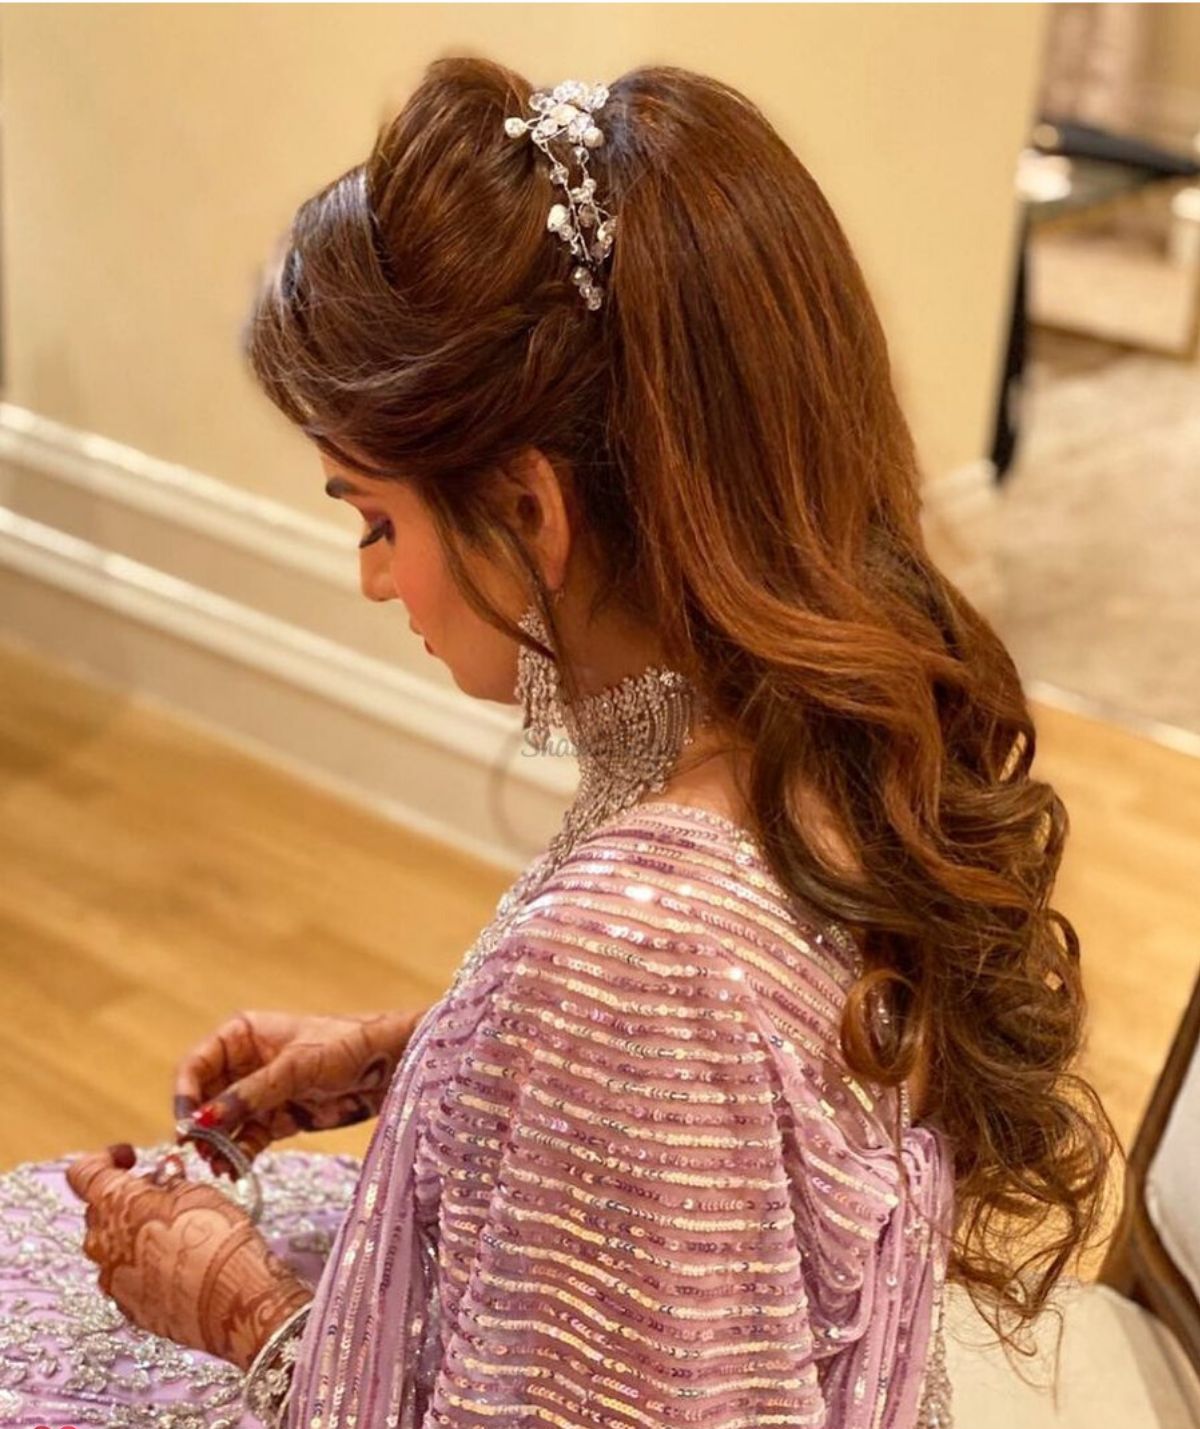 Seven Gorgeous Indian Wedding Hair Updos And Hairstyles For The NewAge  Indian Bride